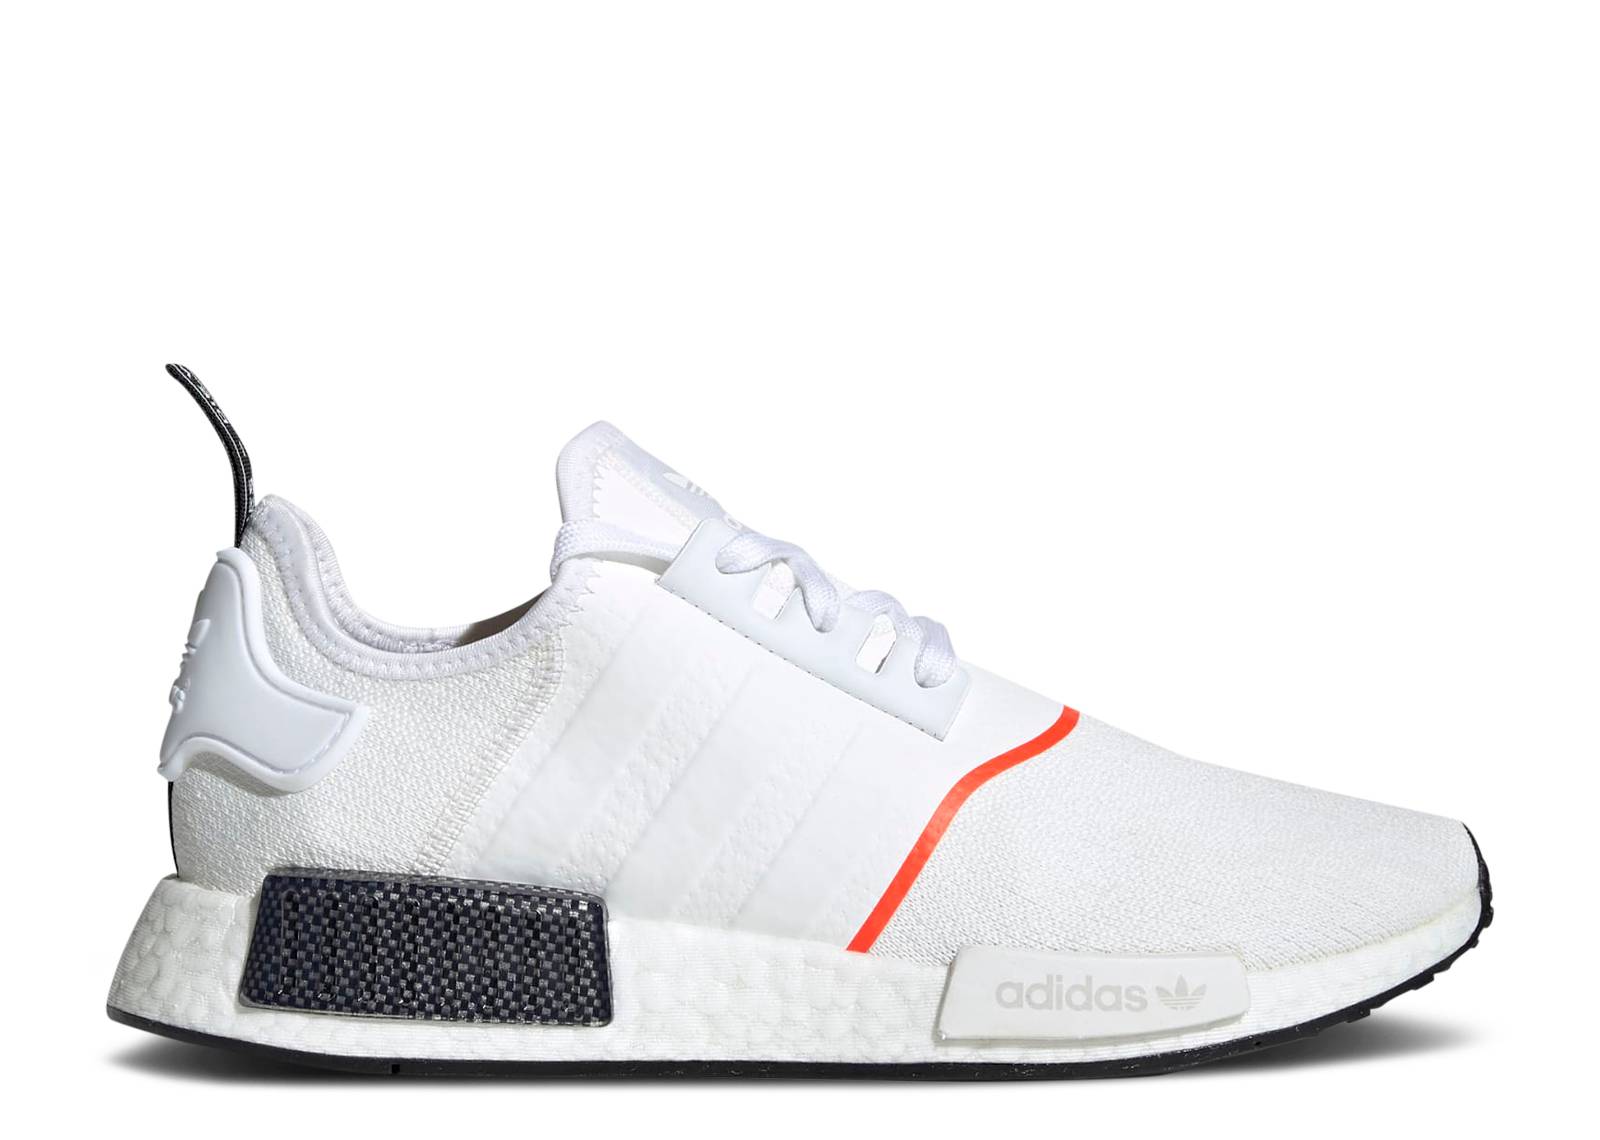 NMD_R1 'White Solar Red'